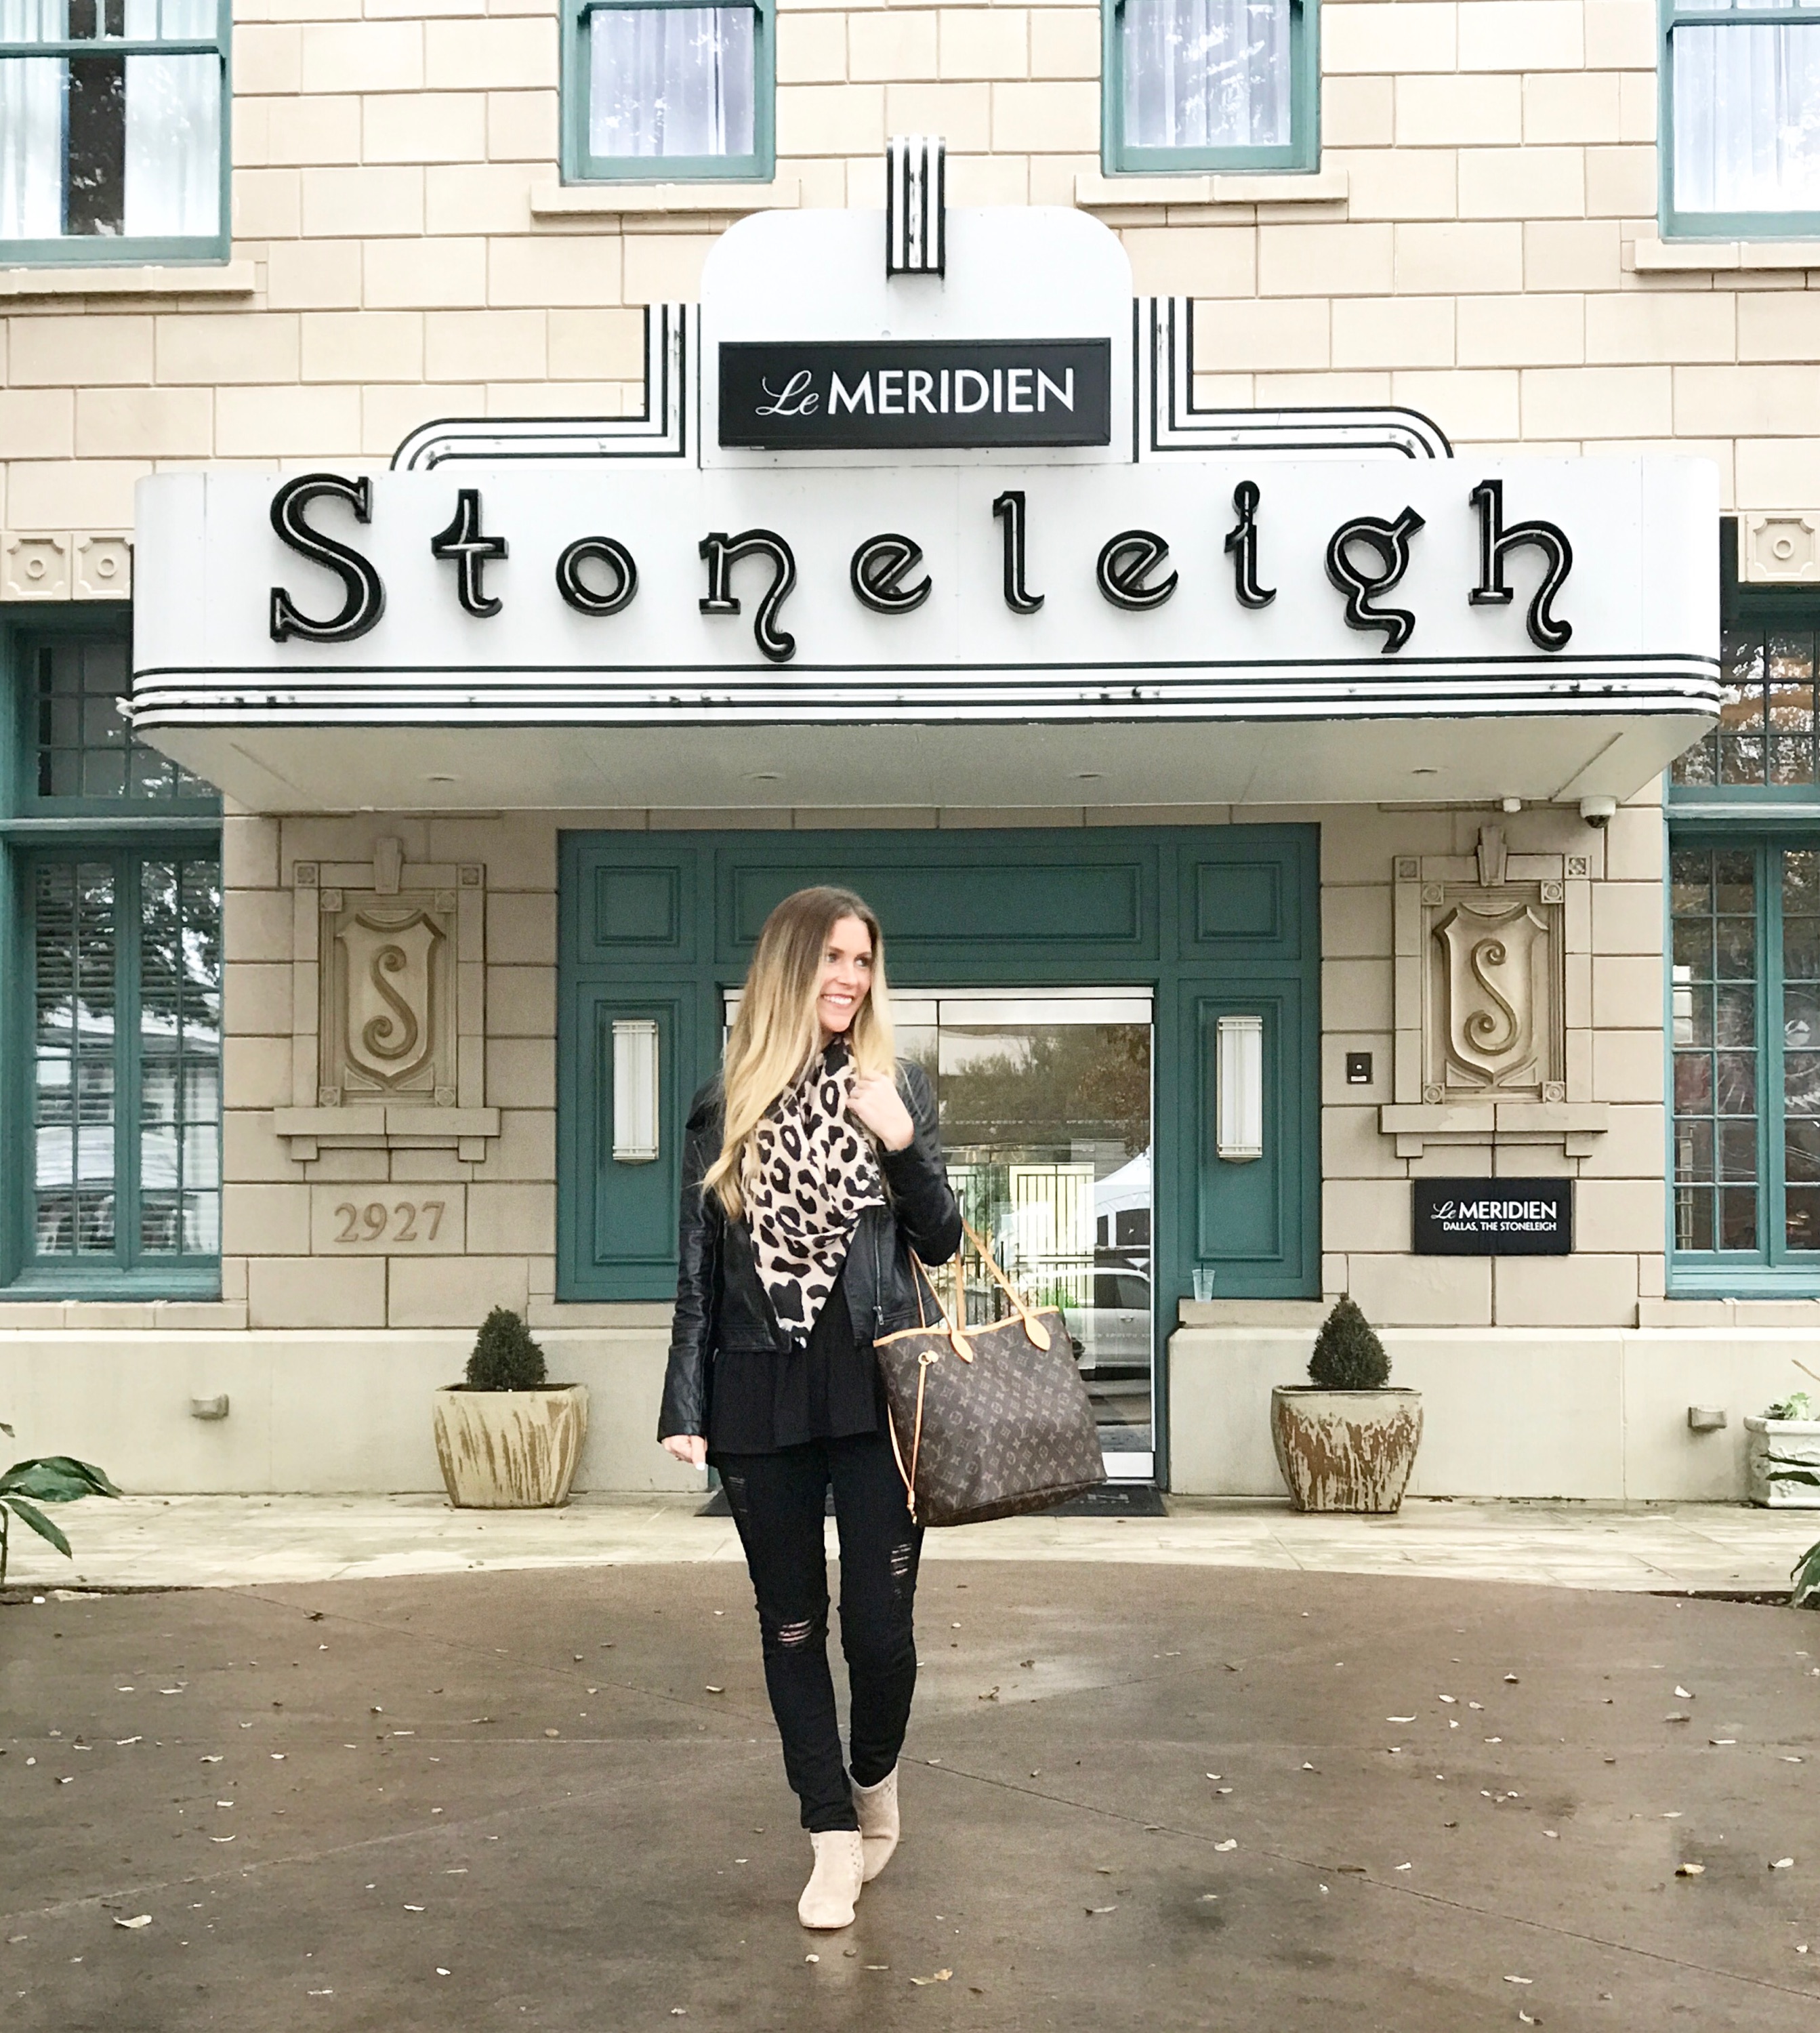 the stoneleigh hotel in dallas texas, where to stay for a girls trip